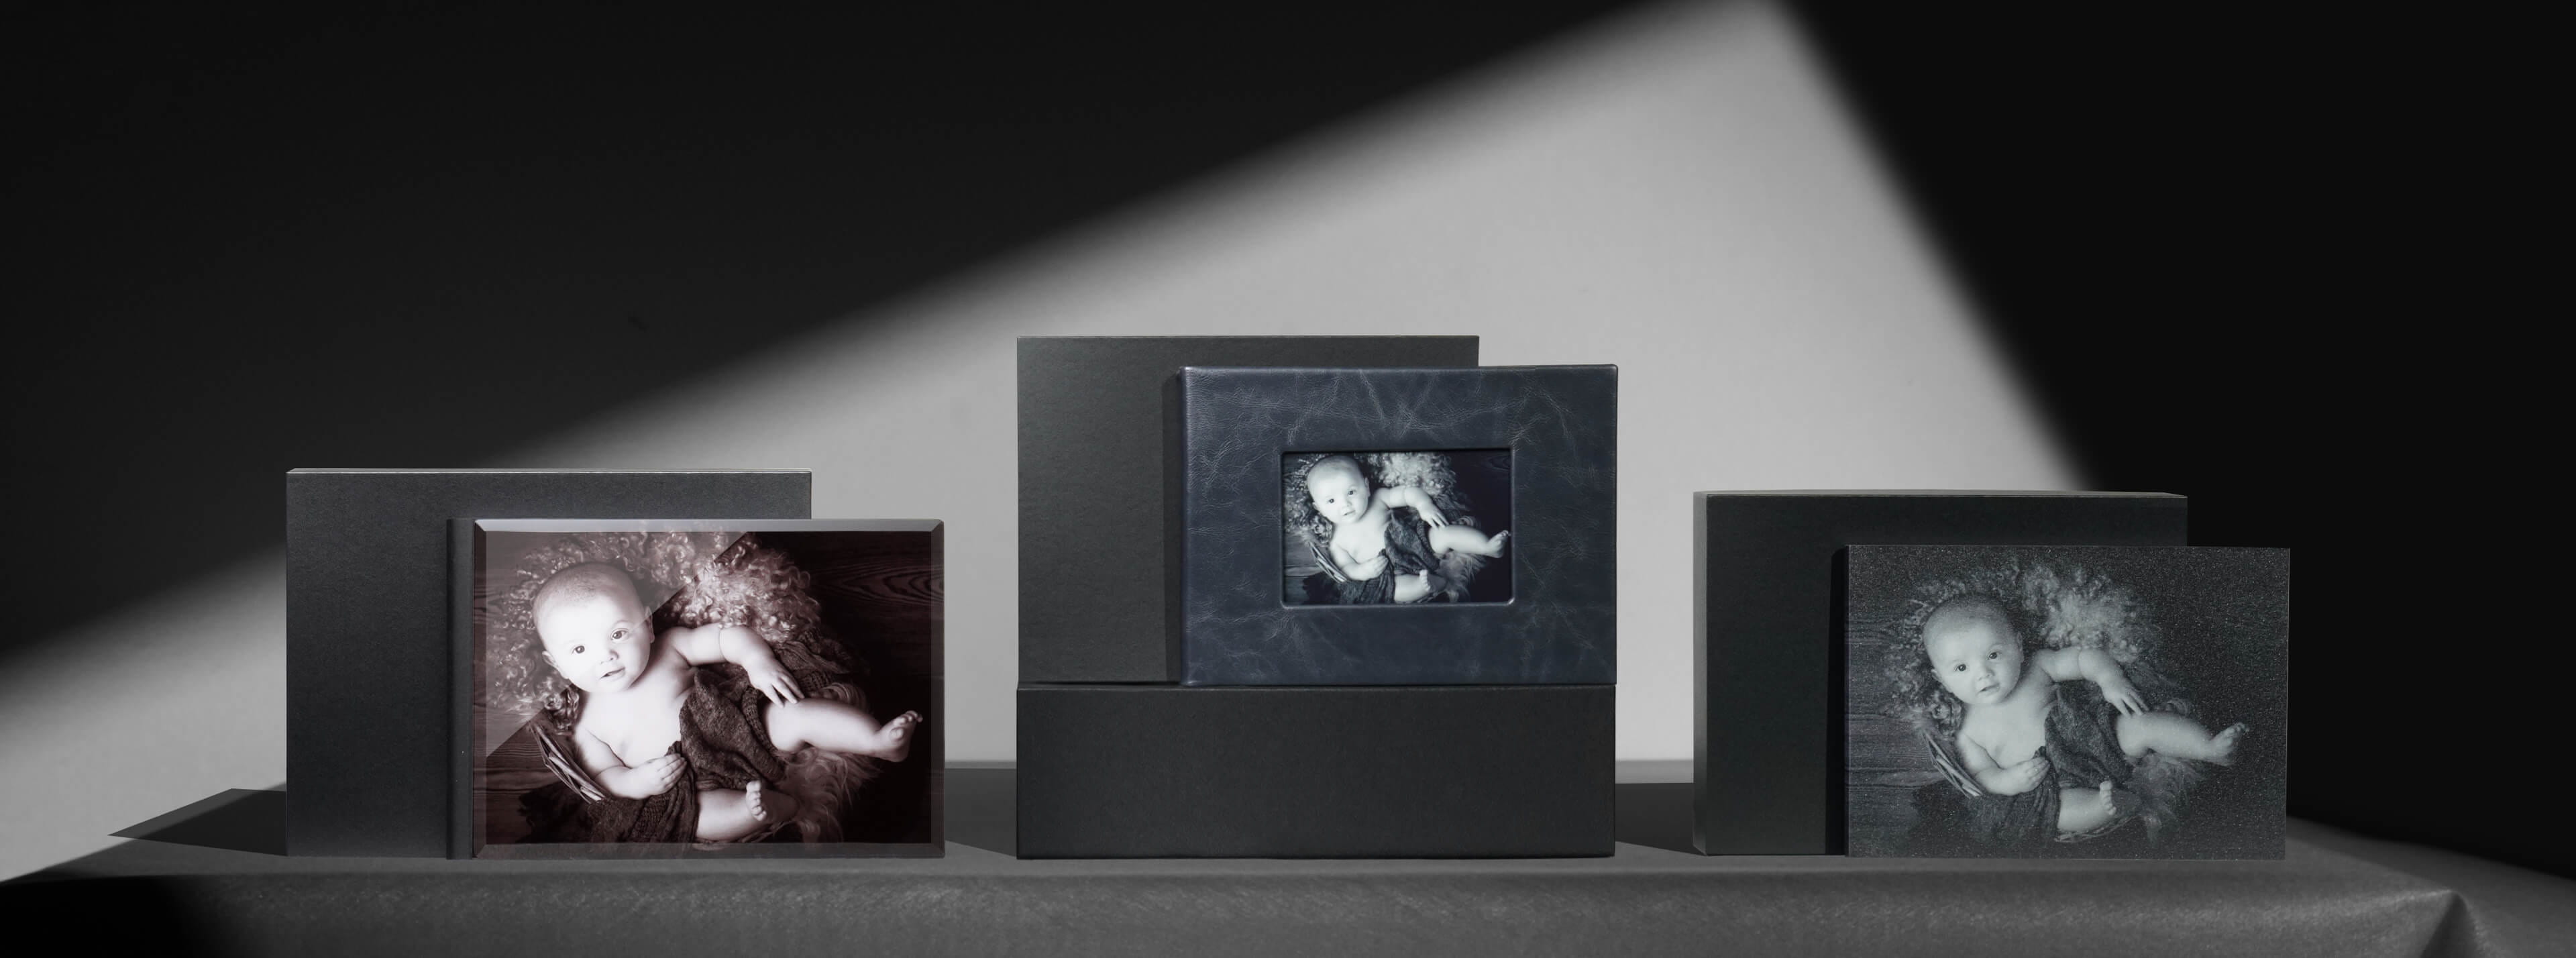 three gift box album sets with different style albums